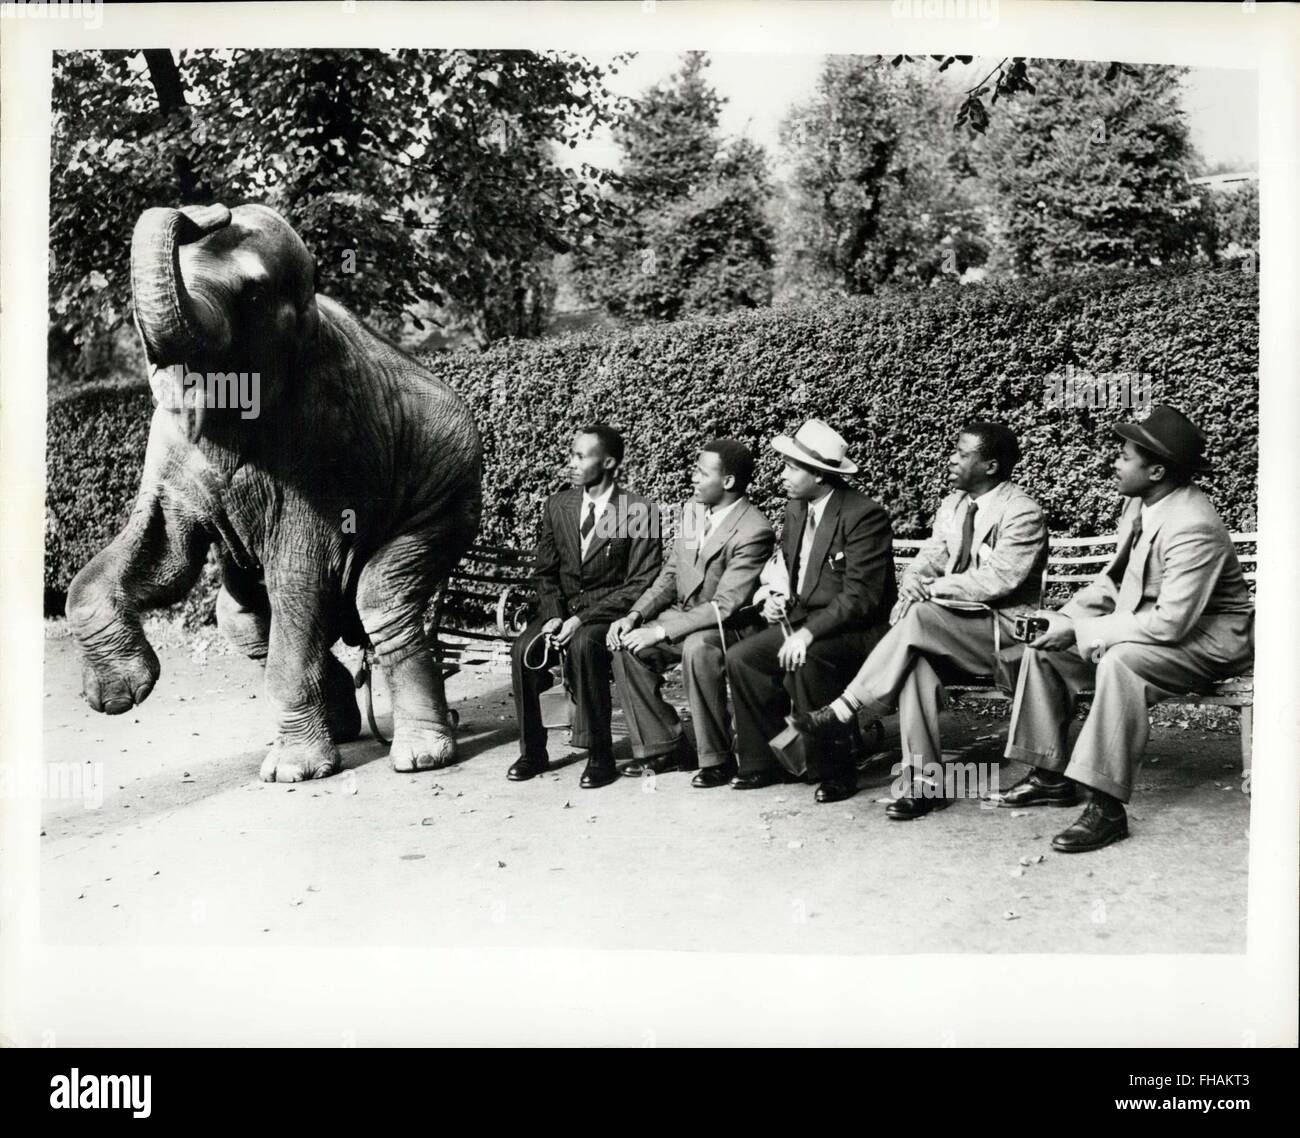 1972 - African Chiffs Visit London ''Jungle'': Five chiefs from the British African colony of Tanganyika are in Britain at the request of their government to study British methods of local government, social services and agricultural developments. Photo shows The five chiefs take time out to visit the London Zoo and Dumbo, the zoo's most popular elephant, puts on his best show for them. To make them feel at home he sat right down beside them. The chiefs are (left to right) Leukuti Sefania Sumley Mollel of Aruaha, Sylvanus Kaaya of the Meru, Amri Dodo of Gorowa, Sabu, Sulton of Mluguru, and Liw Stock Photo